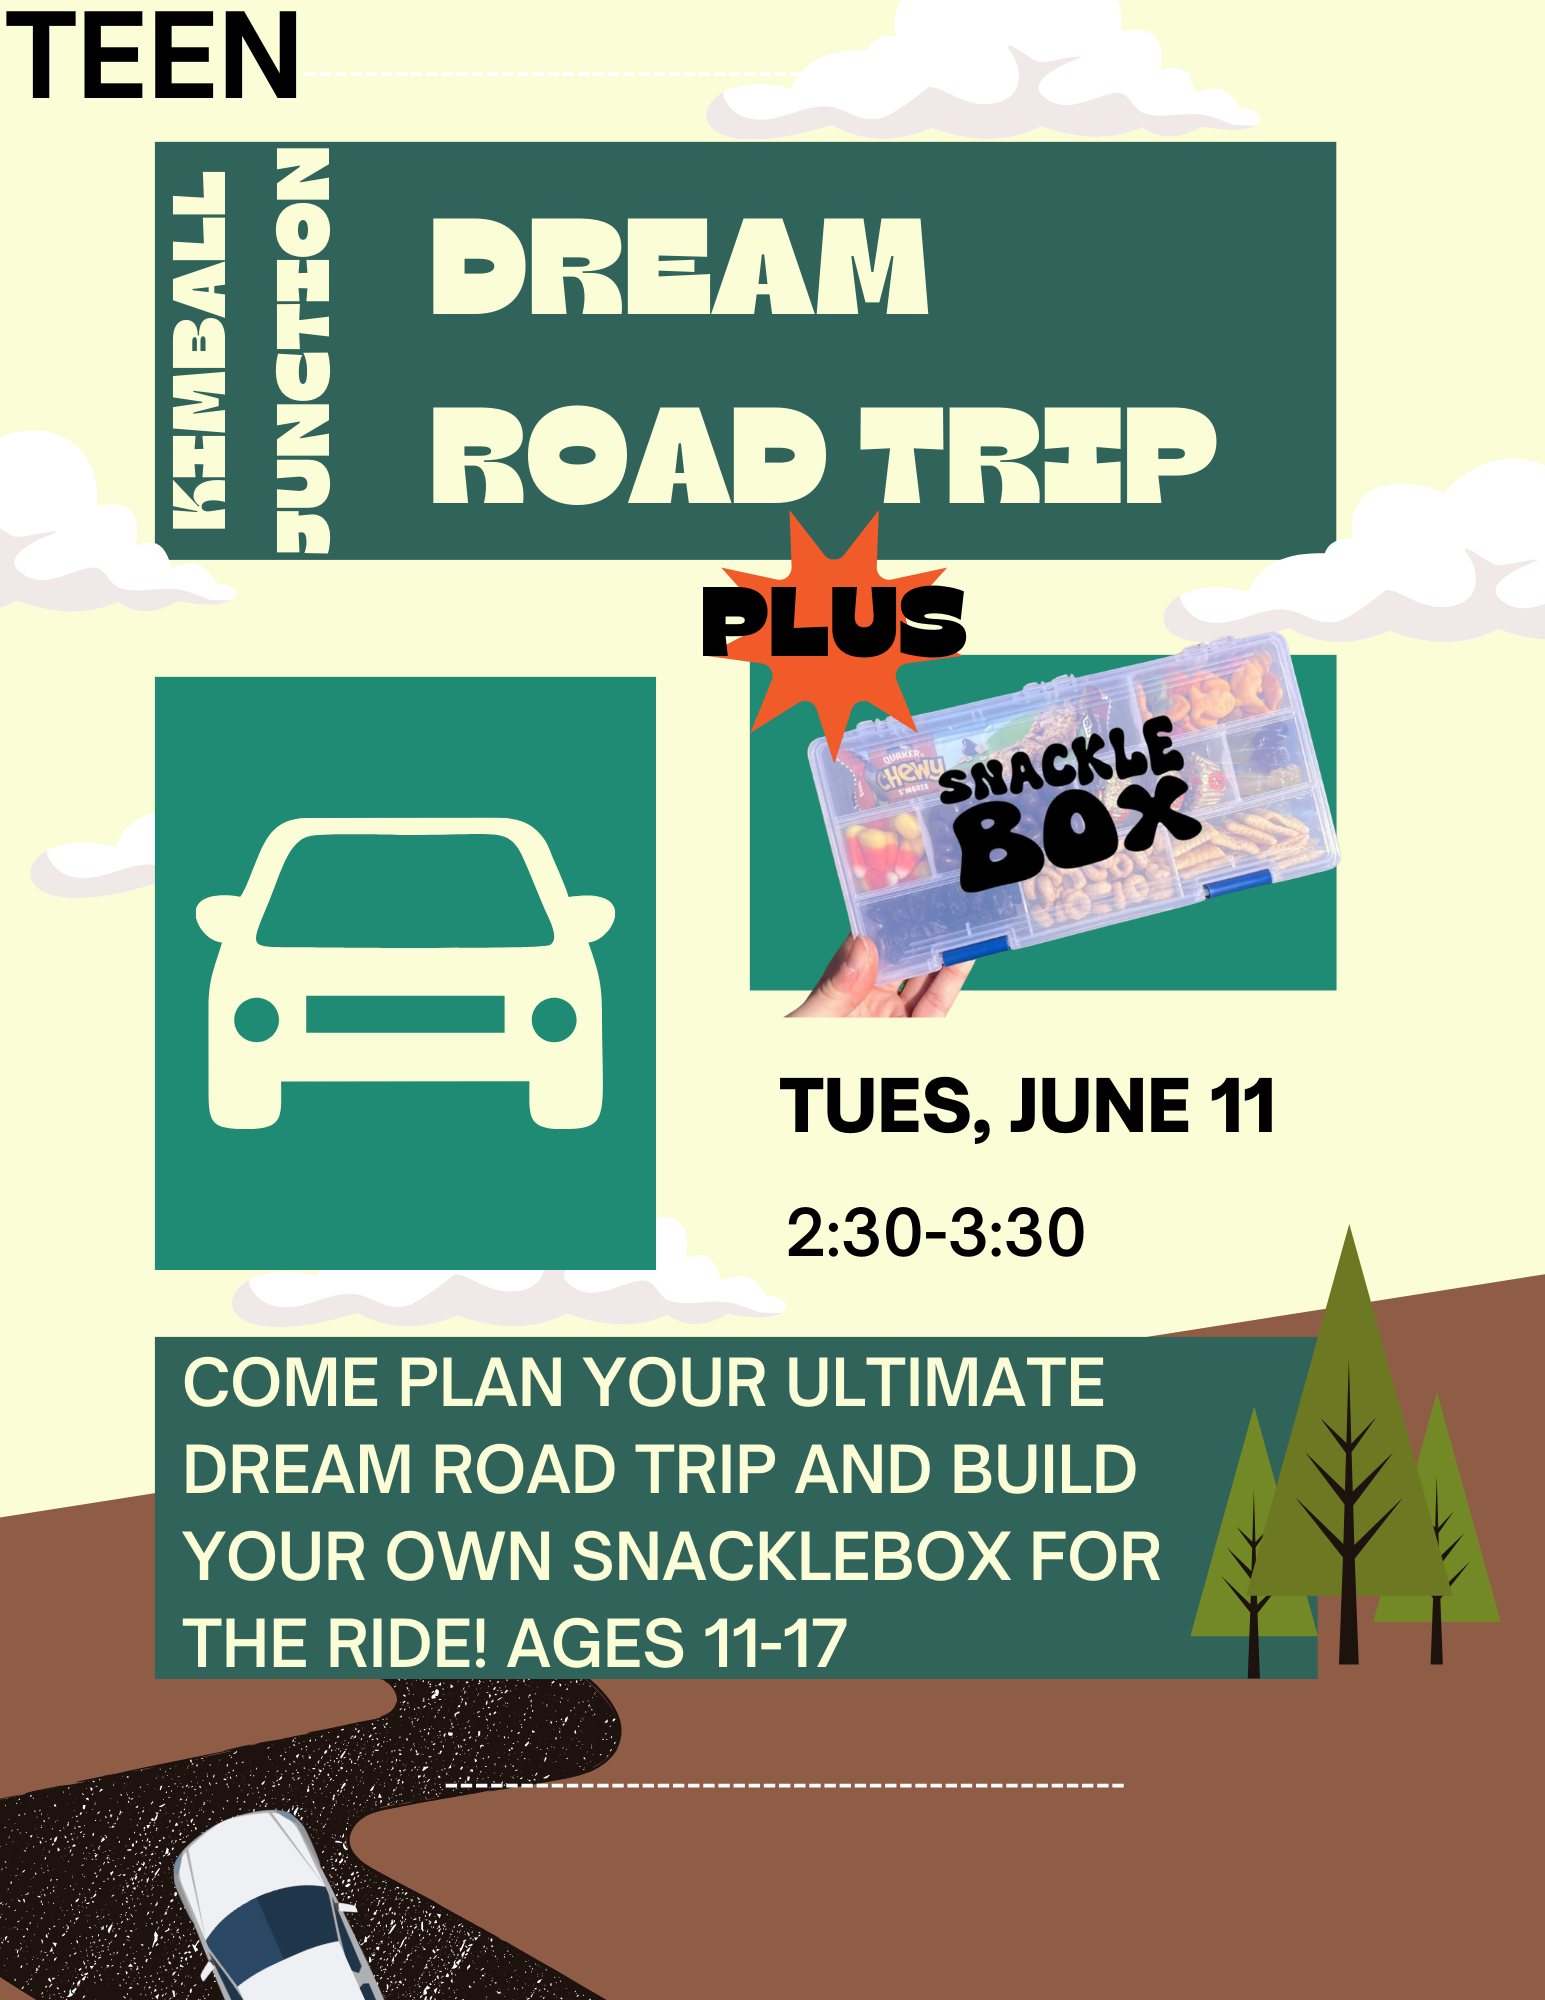 Teen Dream Road Trips & Snackleboxes at Kimball Junction